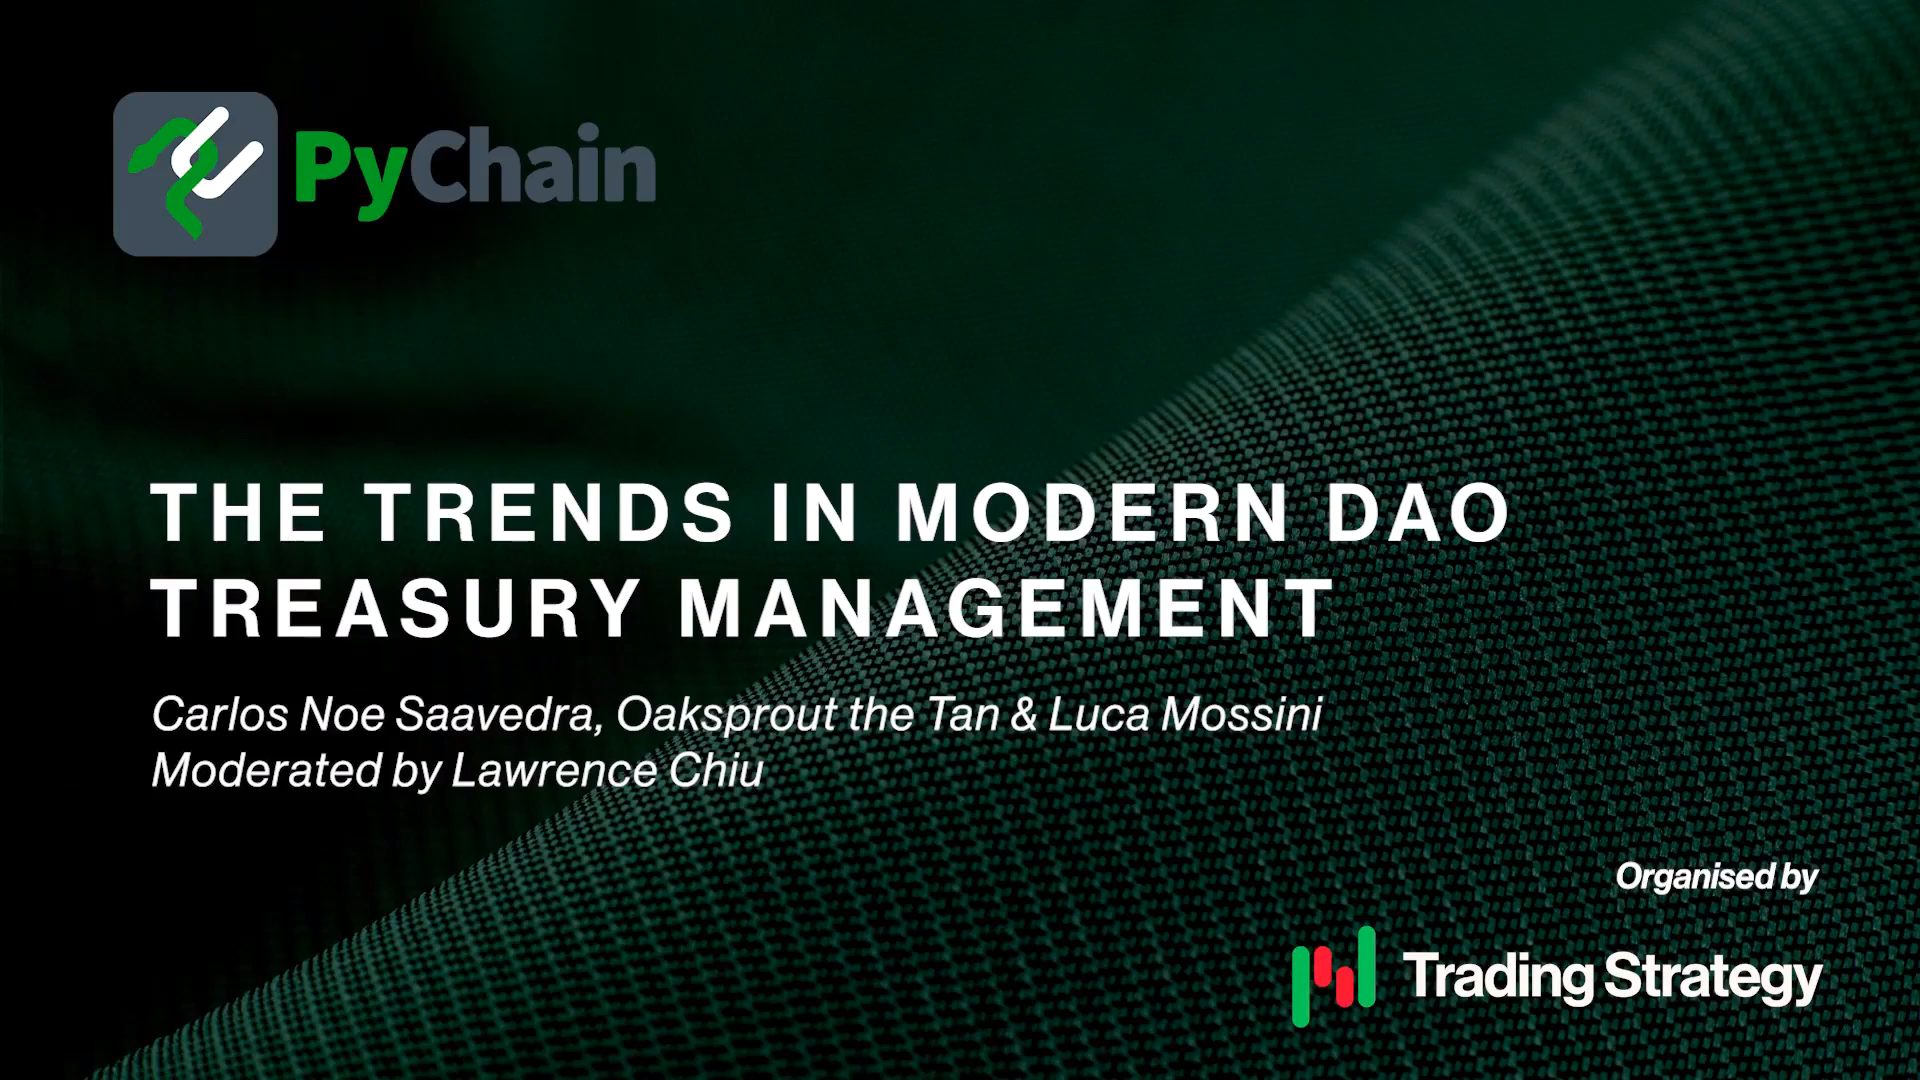 Oaksprout the Tan (Autonolas) with Carlos Noe Saavedra (Fyre) and Luca Mossini (Avantgarde Finance) moderated by Lawrence Chiu (Trading Strategy): The Trends in Modern DAO Treasury Management